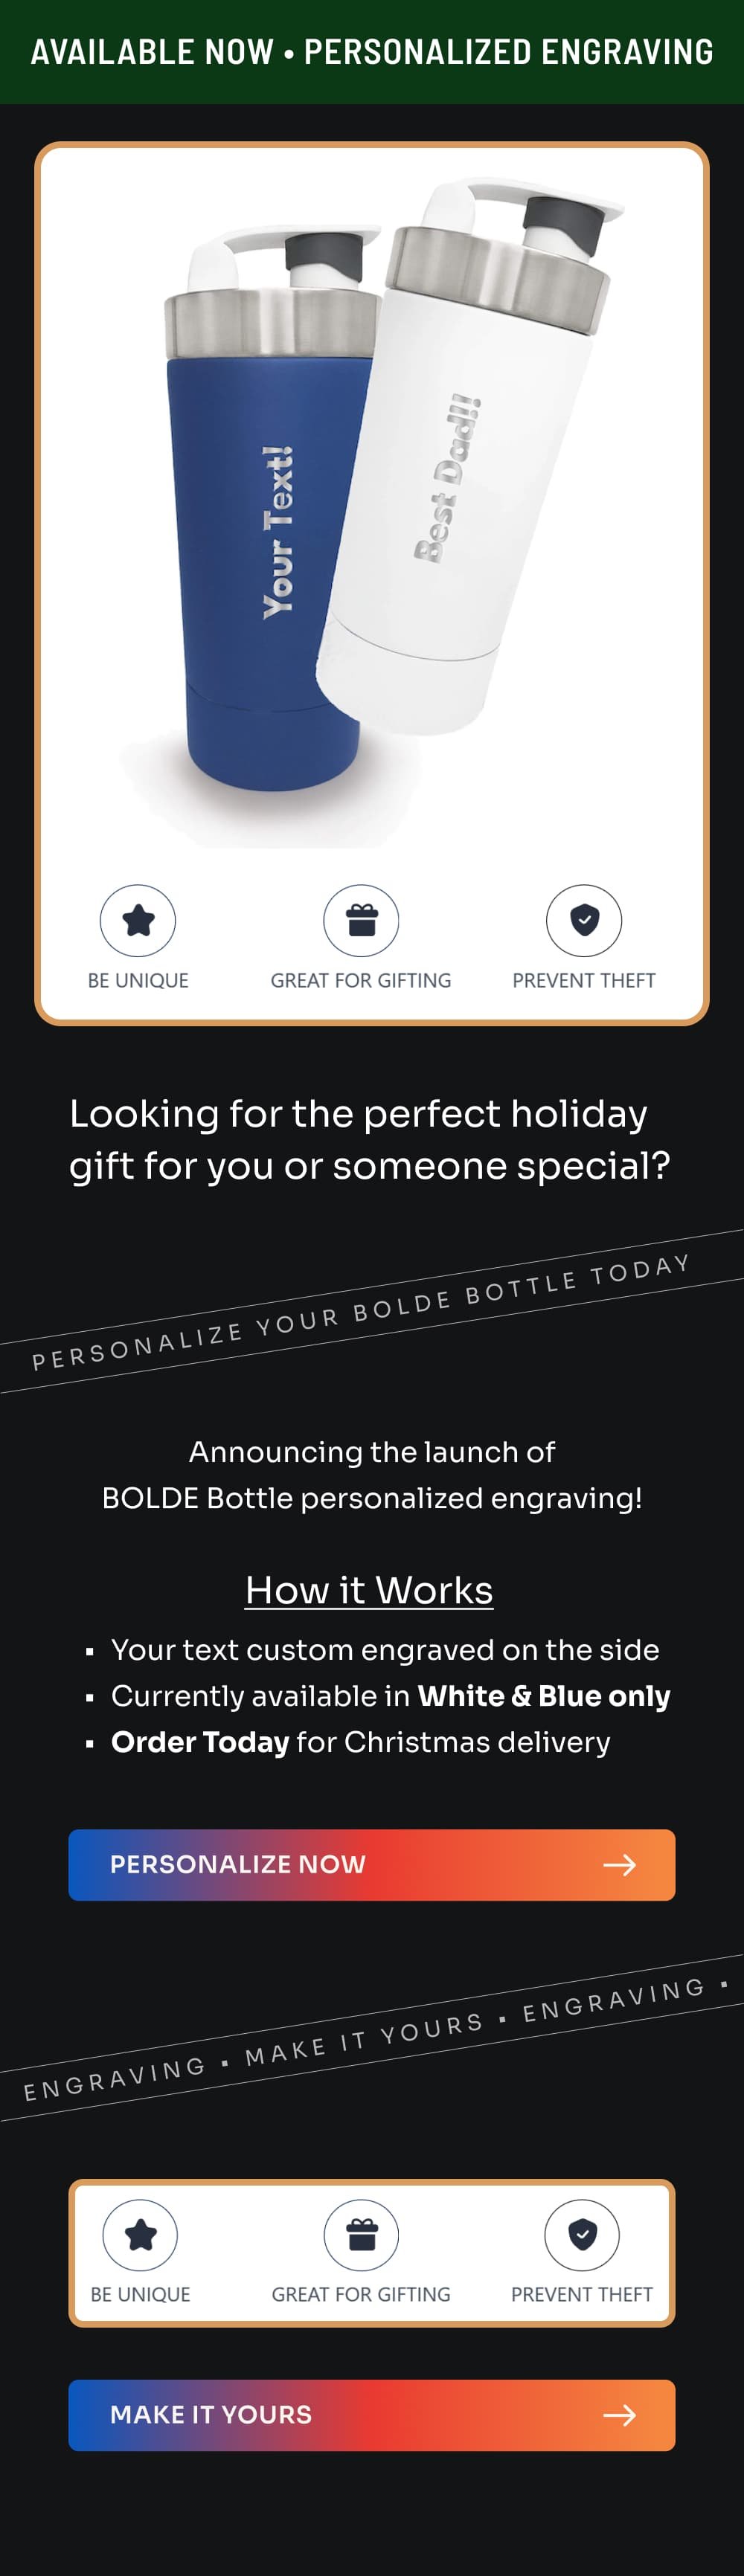 BOLDE Bottle: NEW Personalized Engraving Options • Now Available